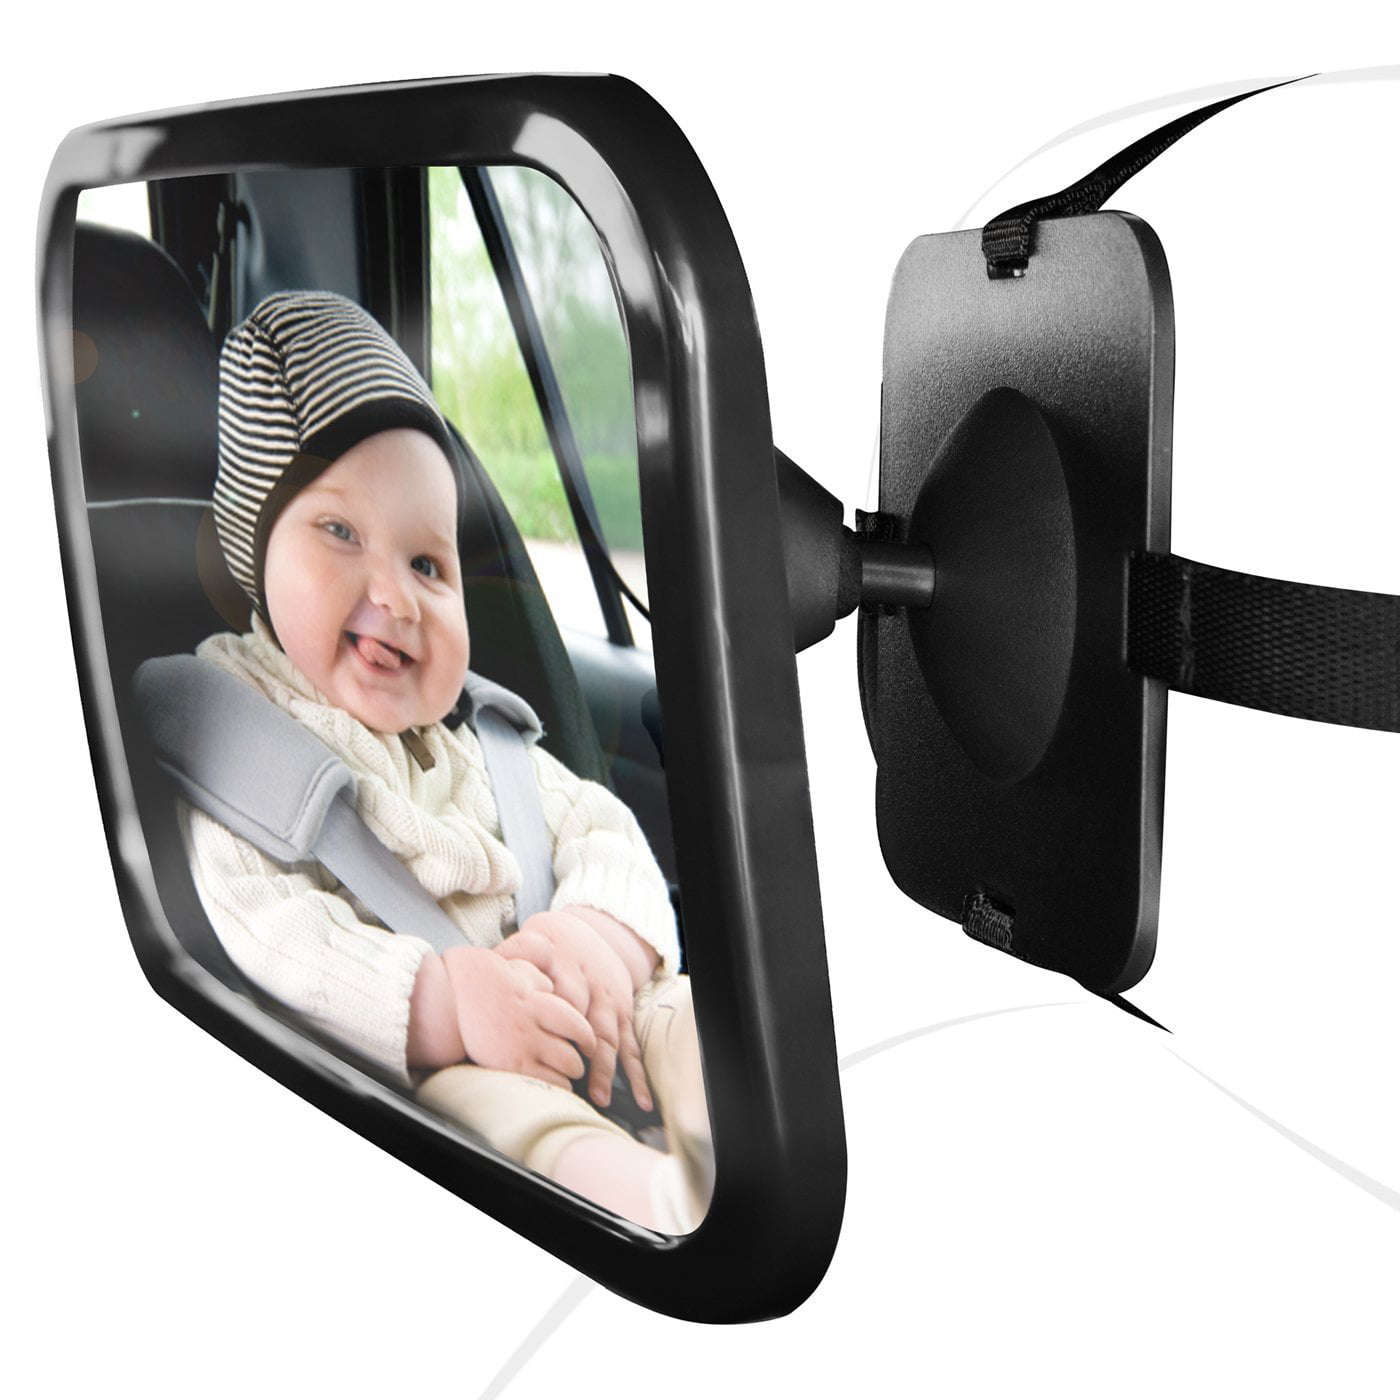 Baby Rear Facing Safety Car Back Seat Easy View Adjustable Infant Mirror 